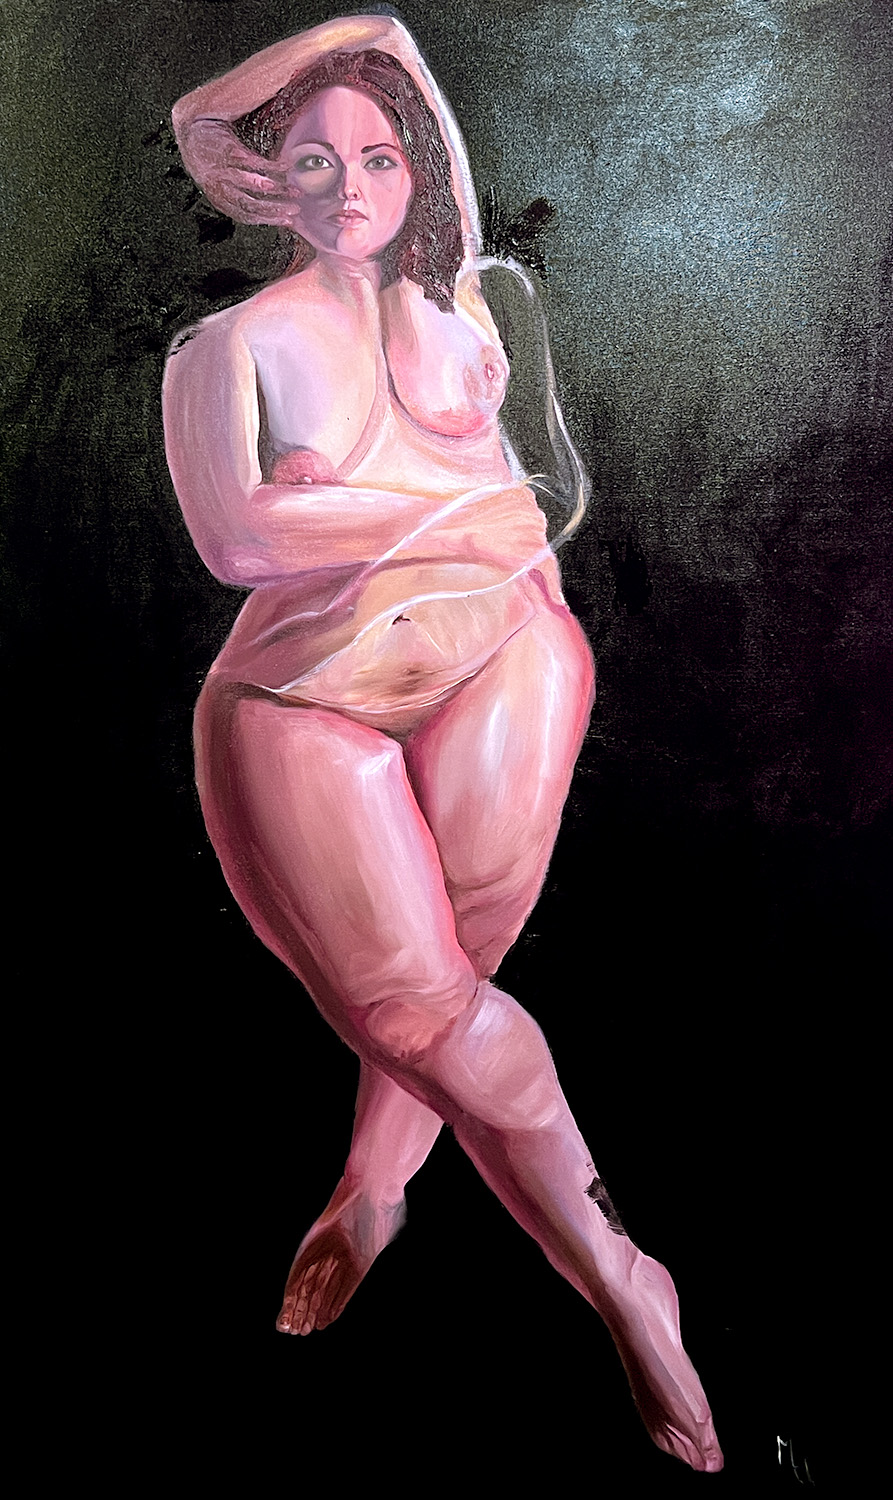 painting - A woman stands and crosses her legs in a forward motion to represent challenge. The arms twist around the body while her right hand pulls on her cheek.